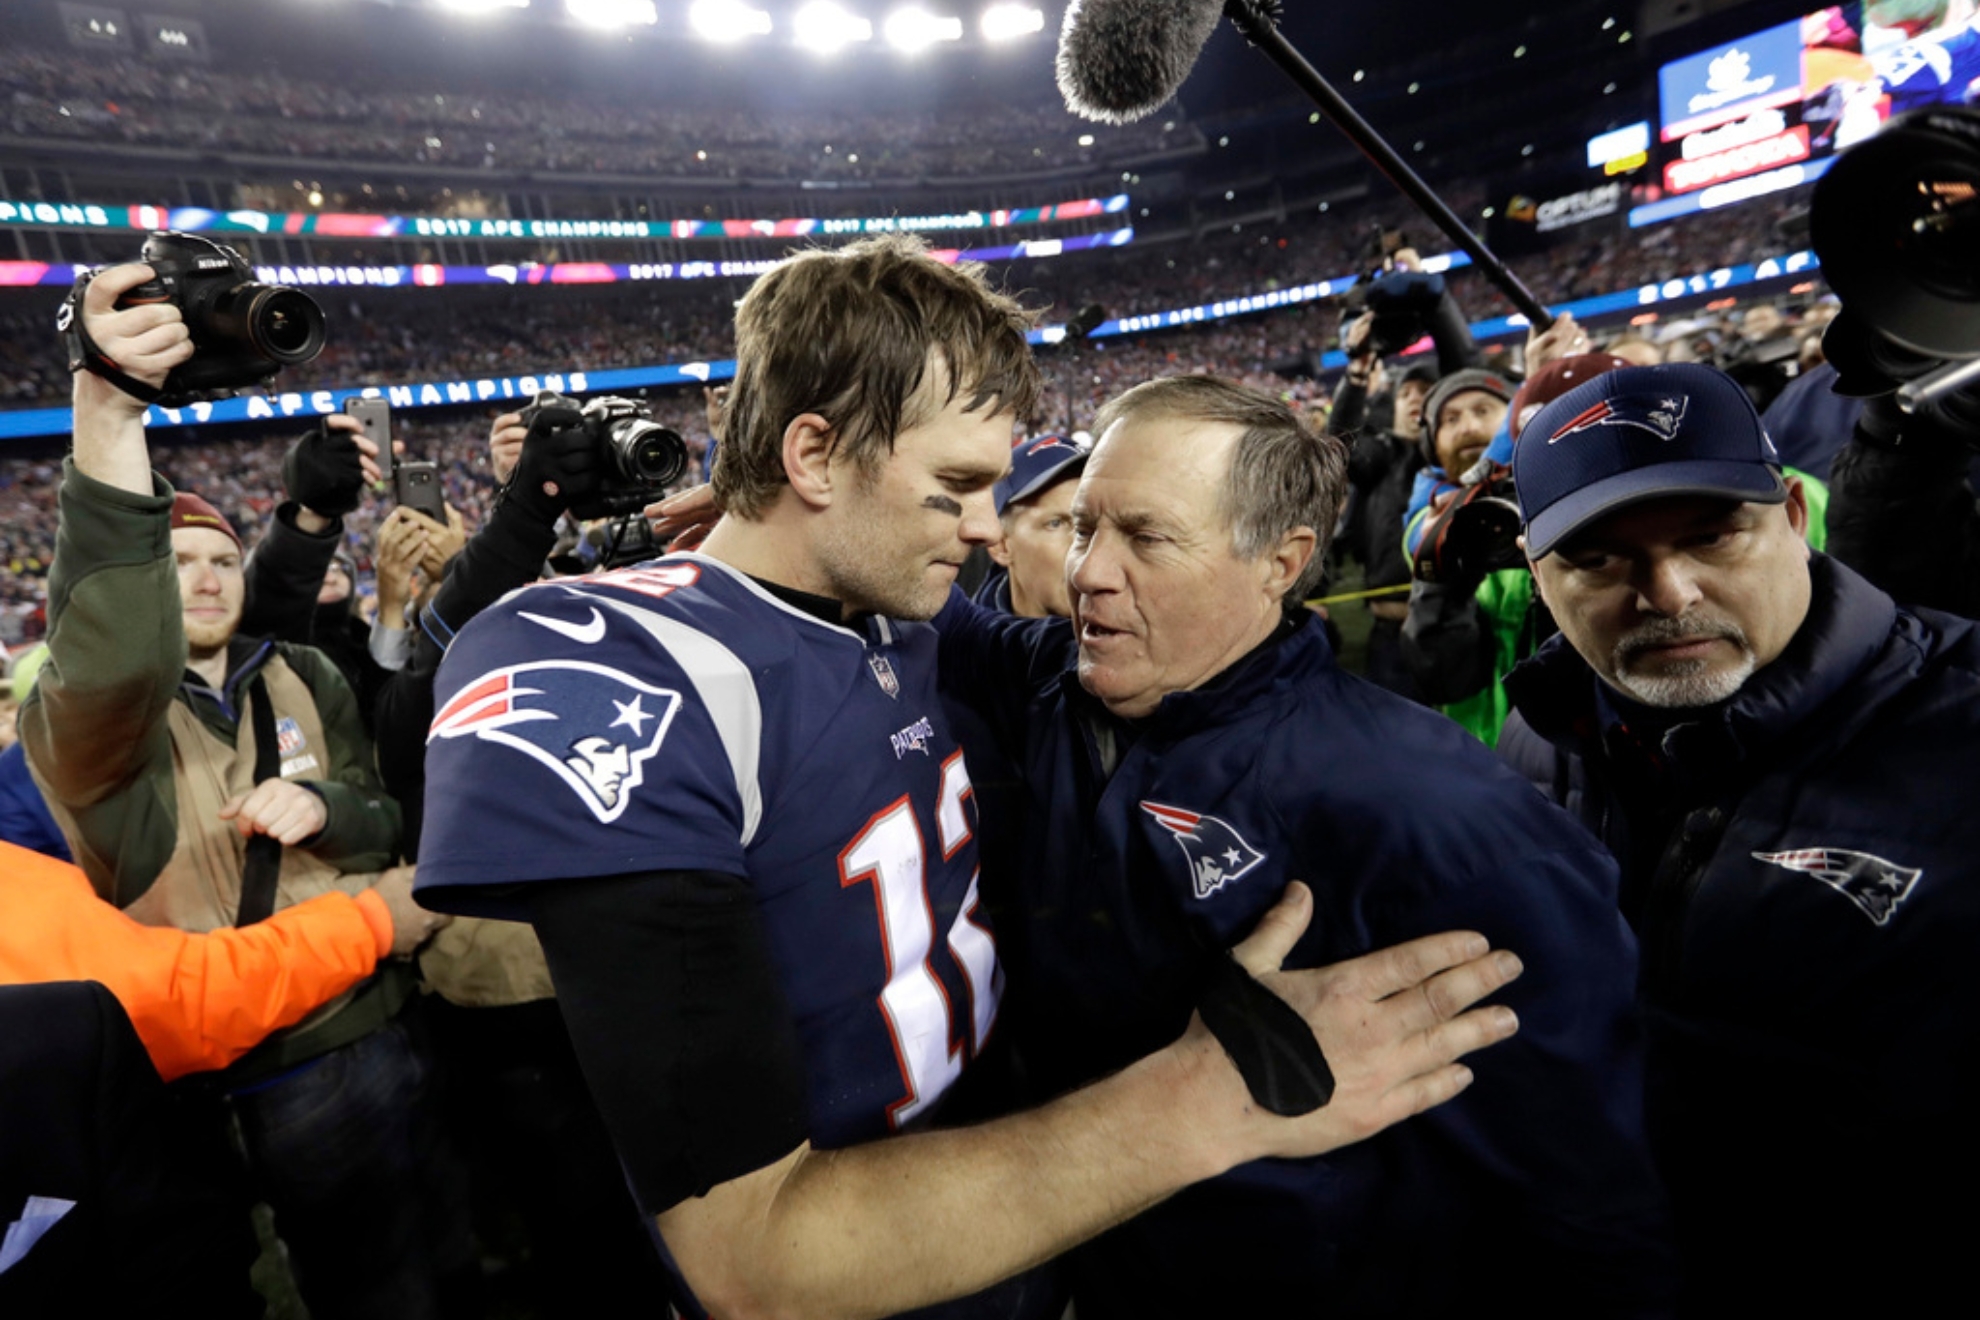 Belichick has received criticism for his lack of success after Tom